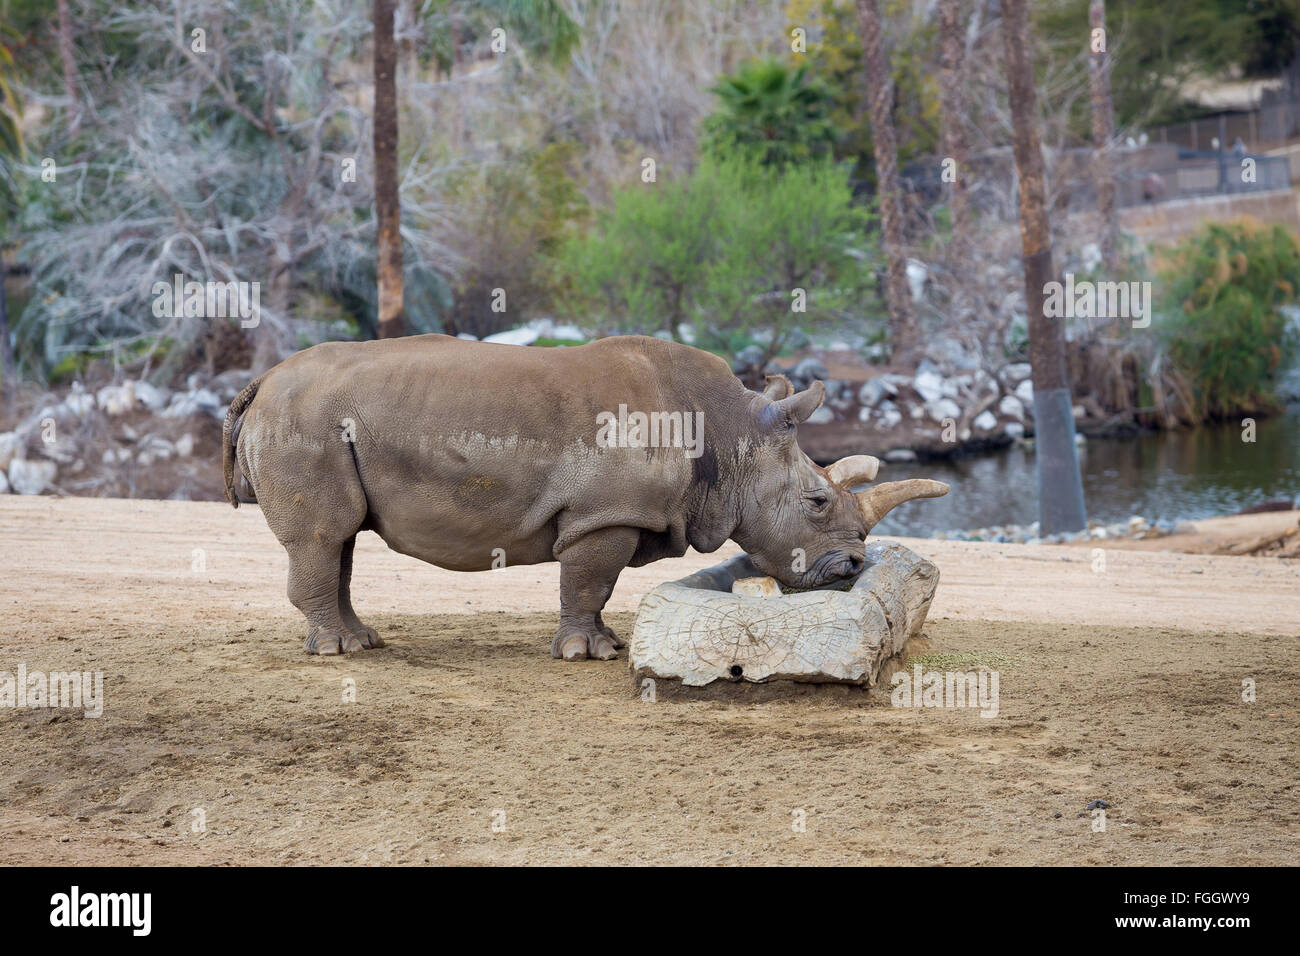 Endangered species Black Rhino or Rhinoceros drinking water at a park. Stock Photo